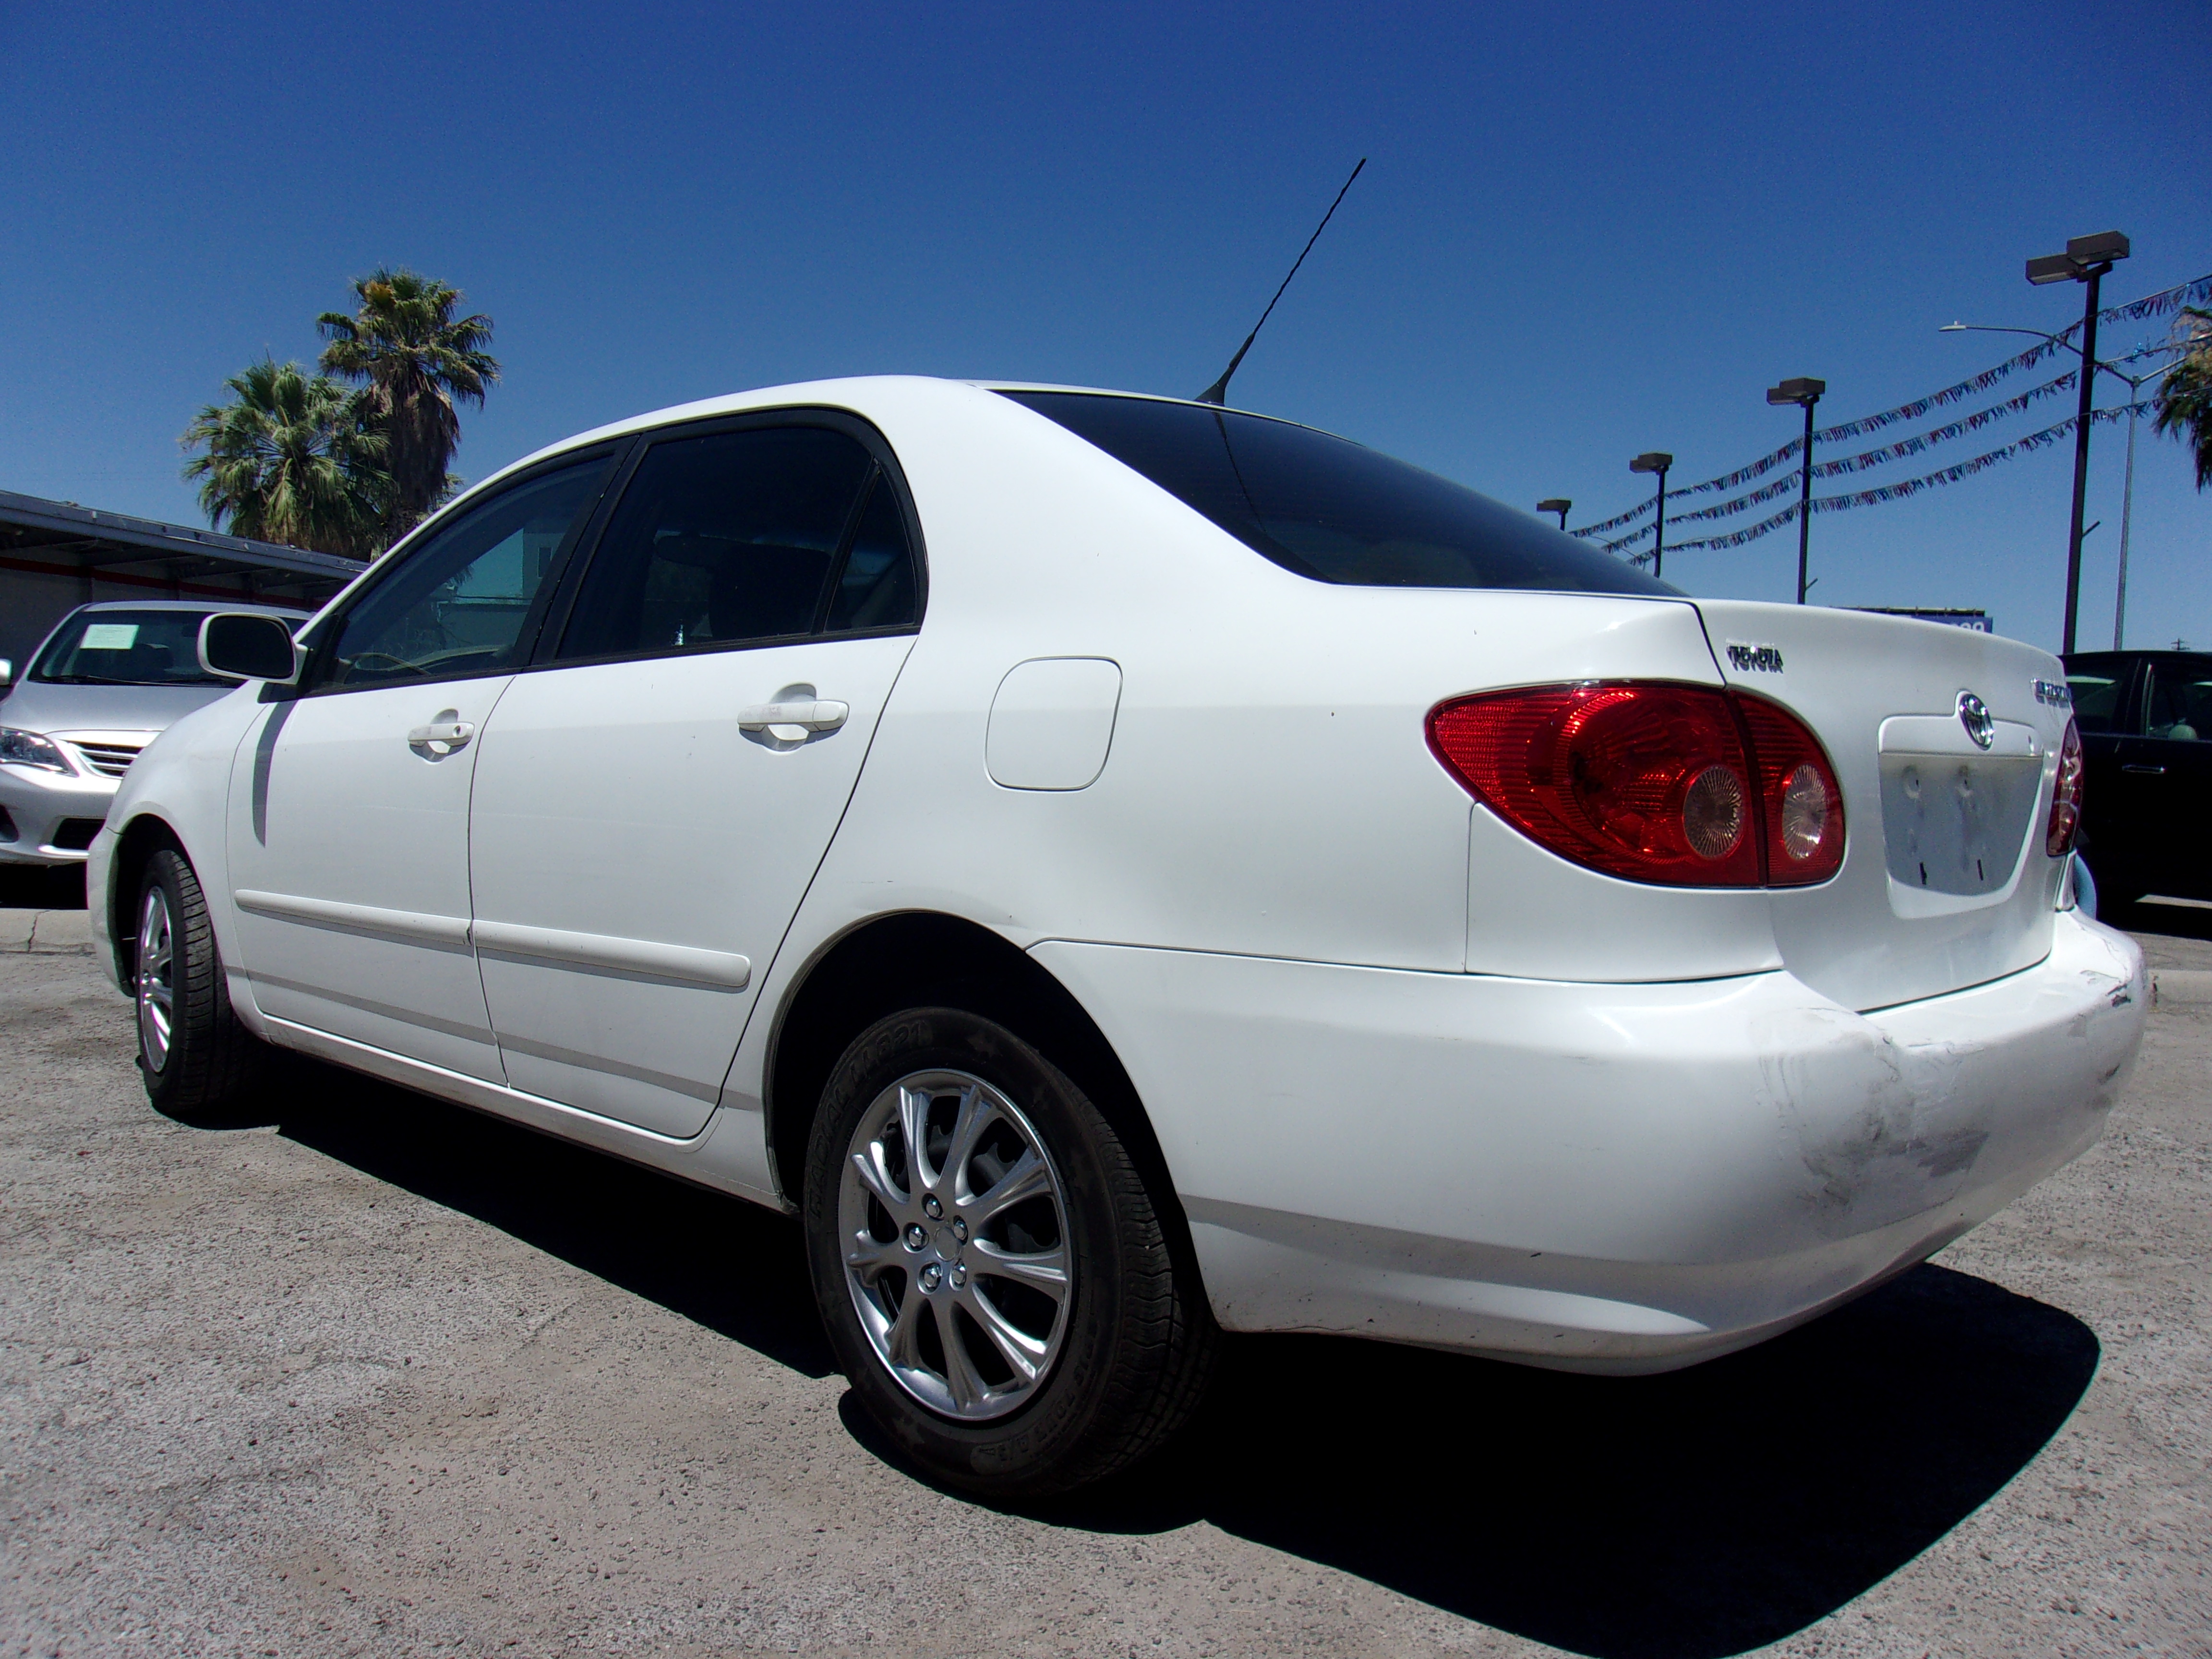 Pre-Owned 2005 TOYOTA COROLLA in Tucson #S7508 | Tucson Used Car Dealer